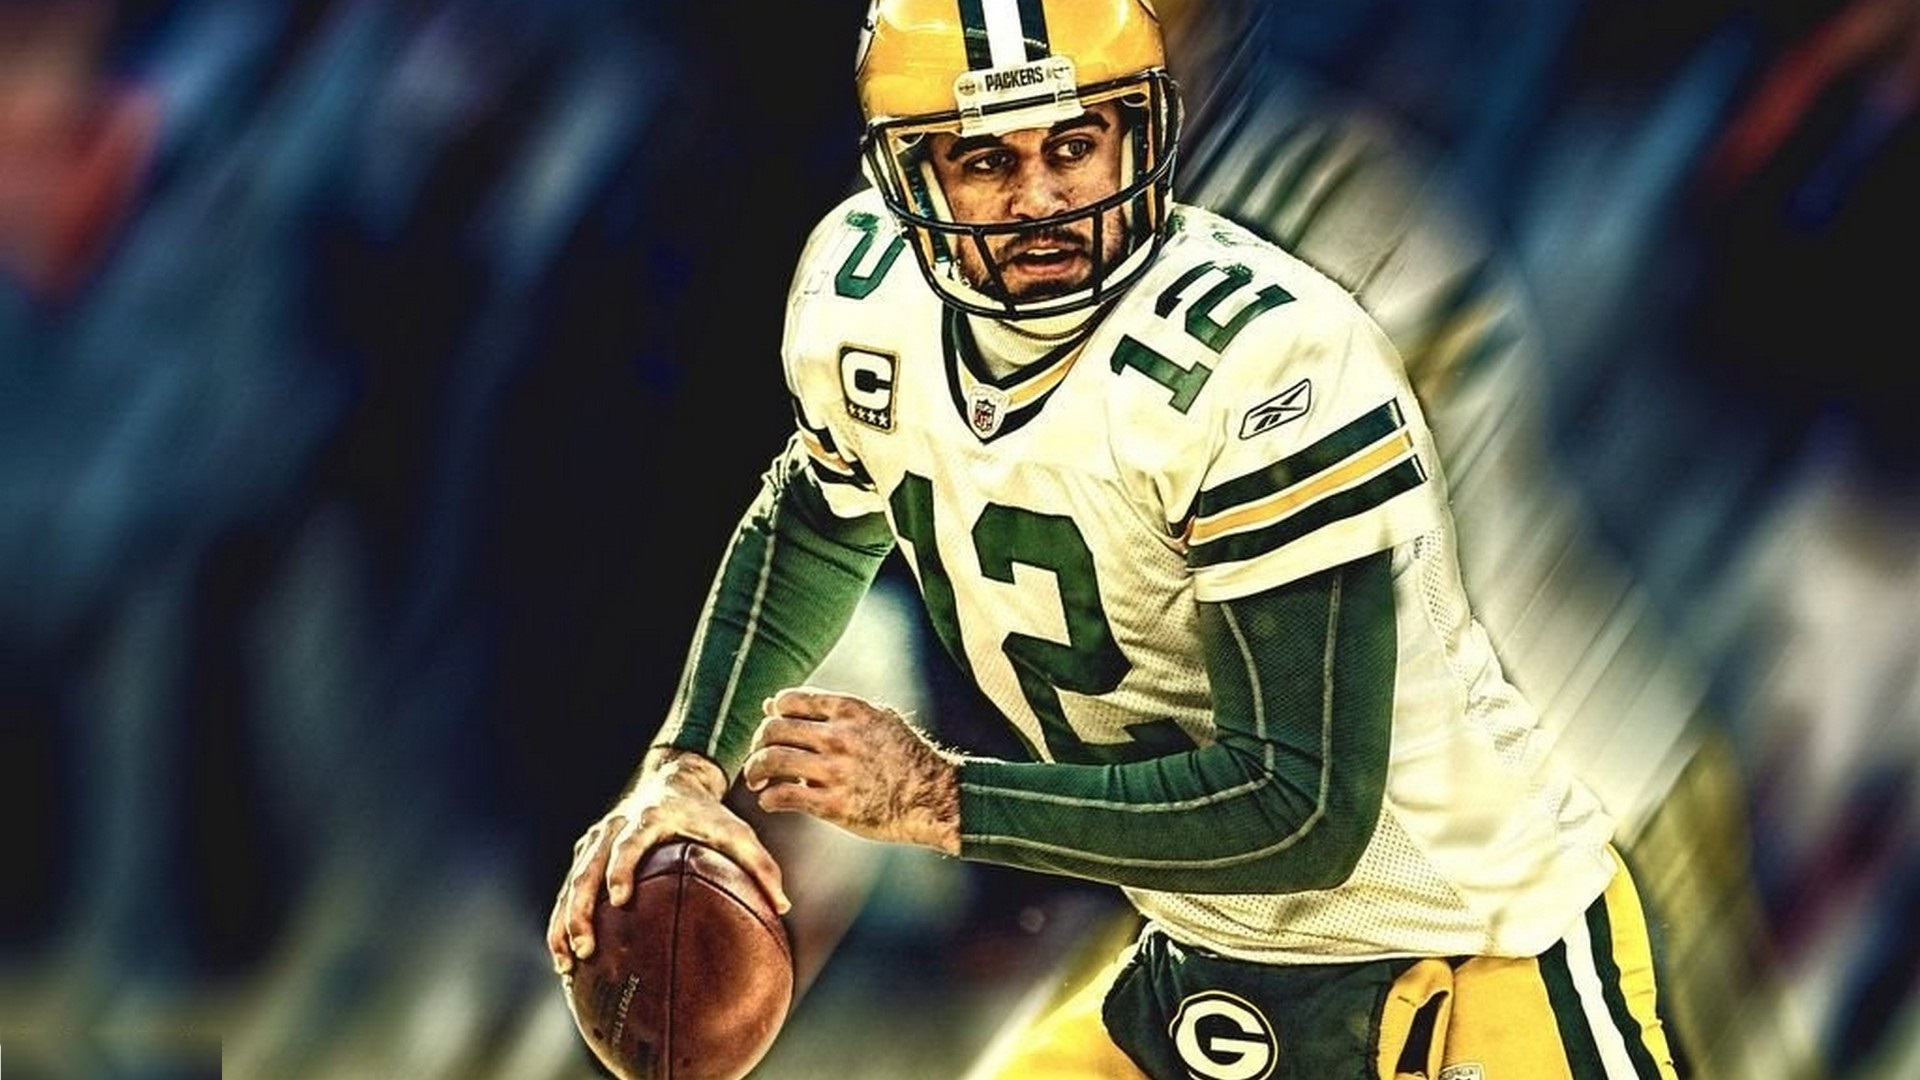 Aaron Rodgers Desktop Wallpapers with high-resolution 1920x1080 pixel. You can use this wallpaper for your Mac or Windows Desktop Background, iPhone, Android or Tablet and another Smartphone device